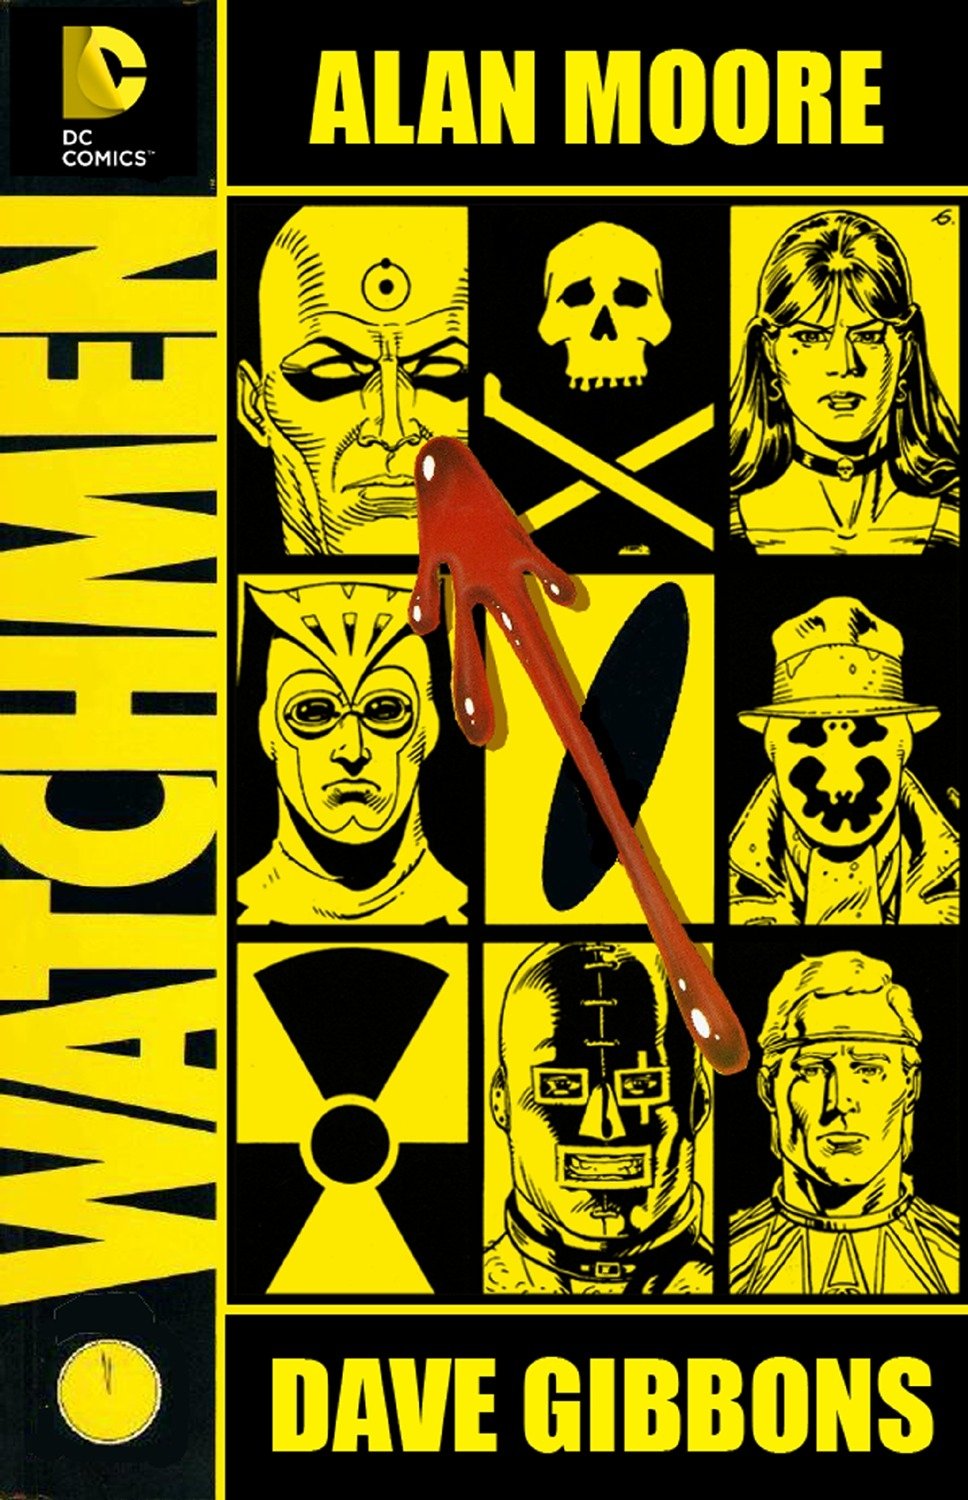 “Watchmen” by Alan Moore and Dave Gibbons (1986)